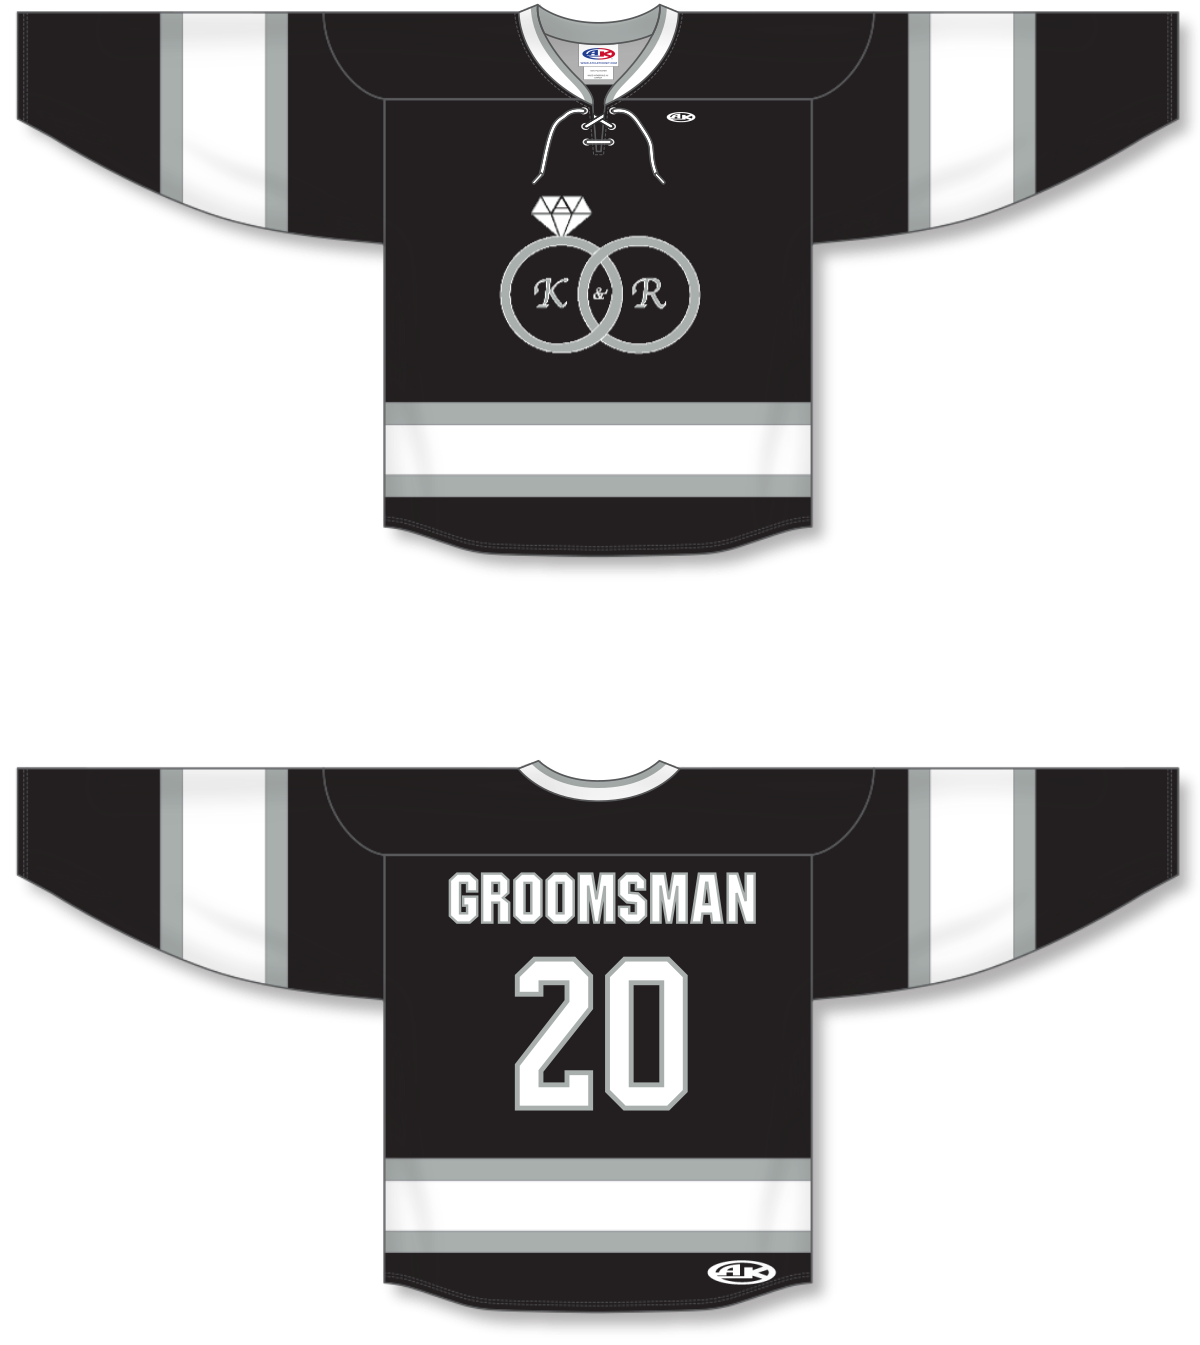 Hockey Jersey Template printable pdf download